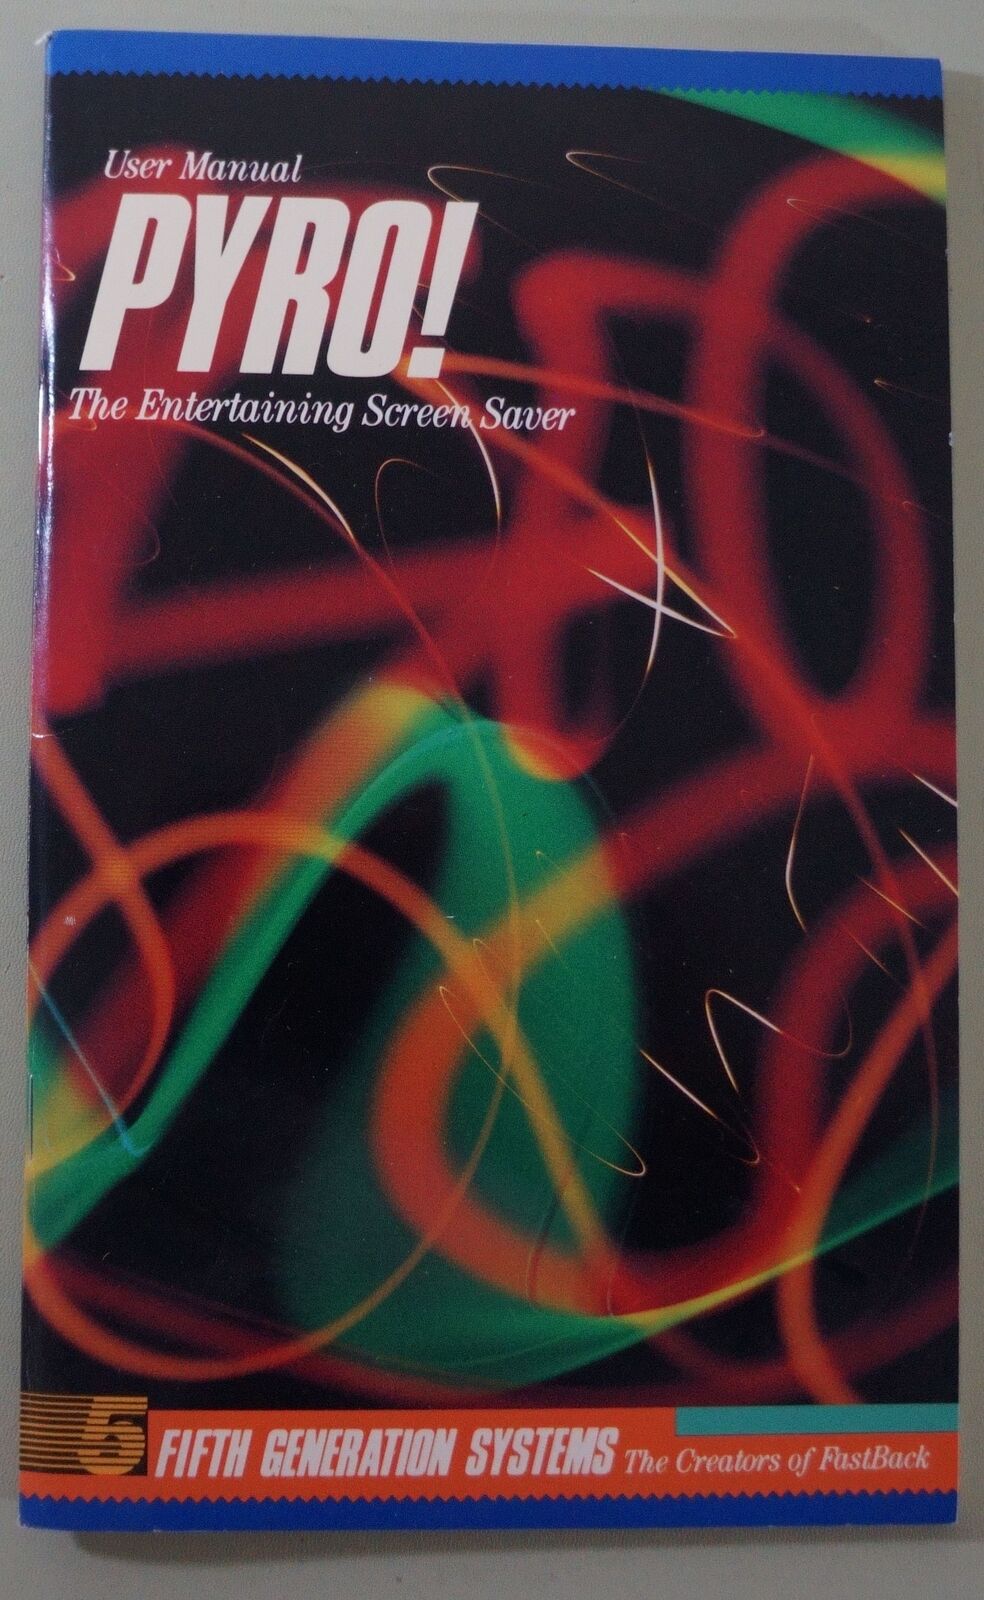 PYRO Screen Saver for Macintosh - Fifth Generation Systems - User Manual - 1990